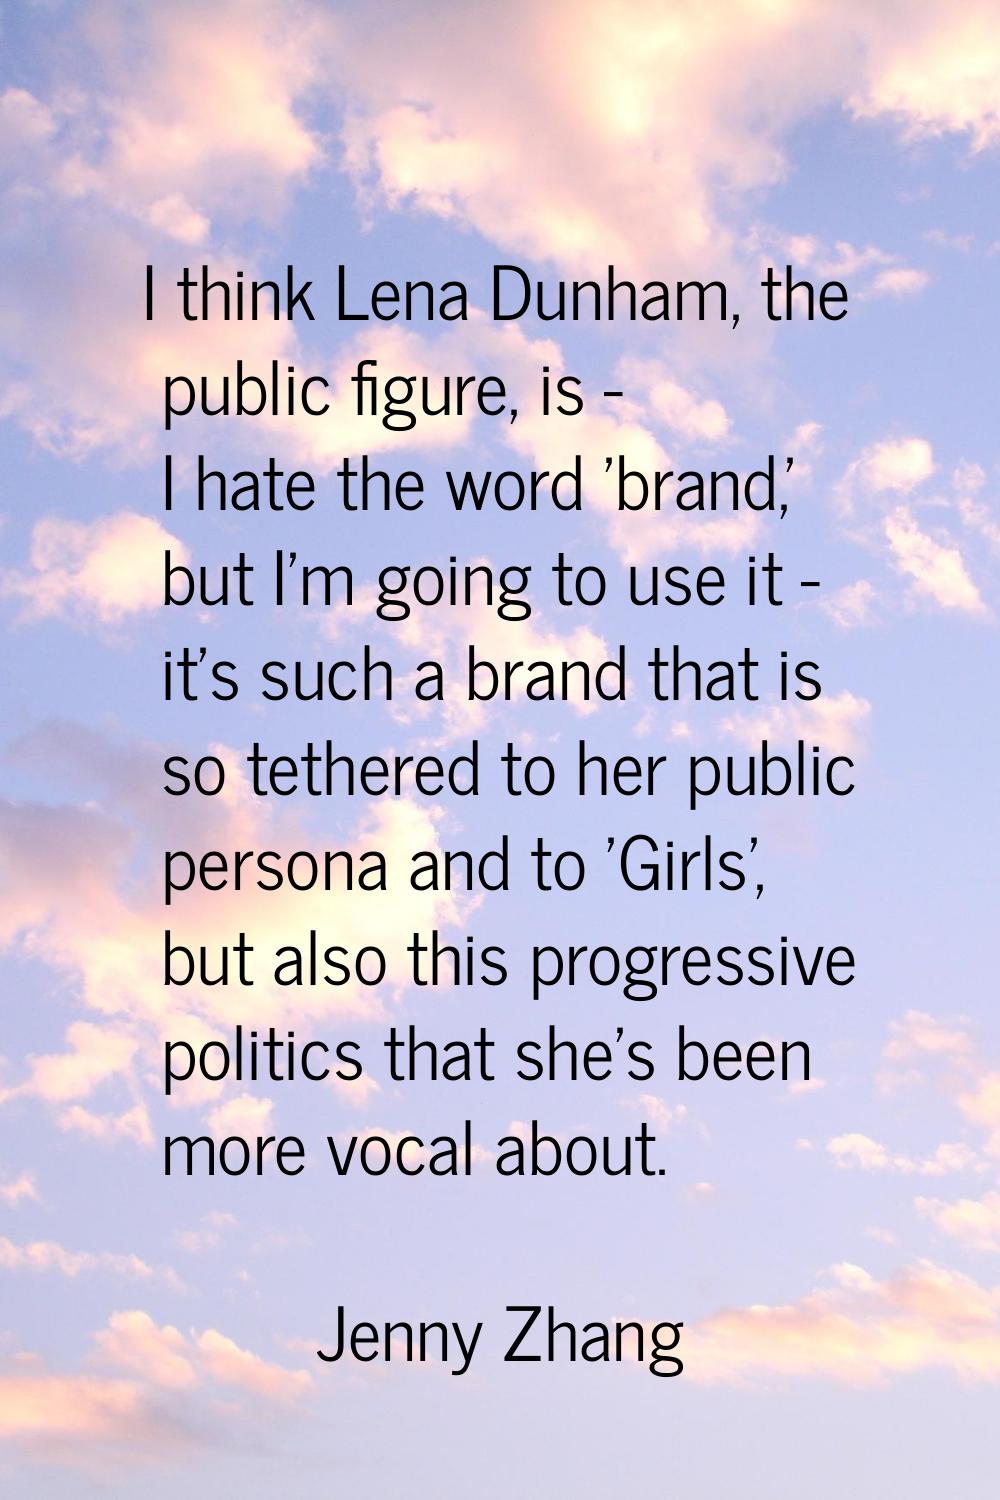 I think Lena Dunham, the public figure, is - I hate the word 'brand,' but I'm going to use it - it'